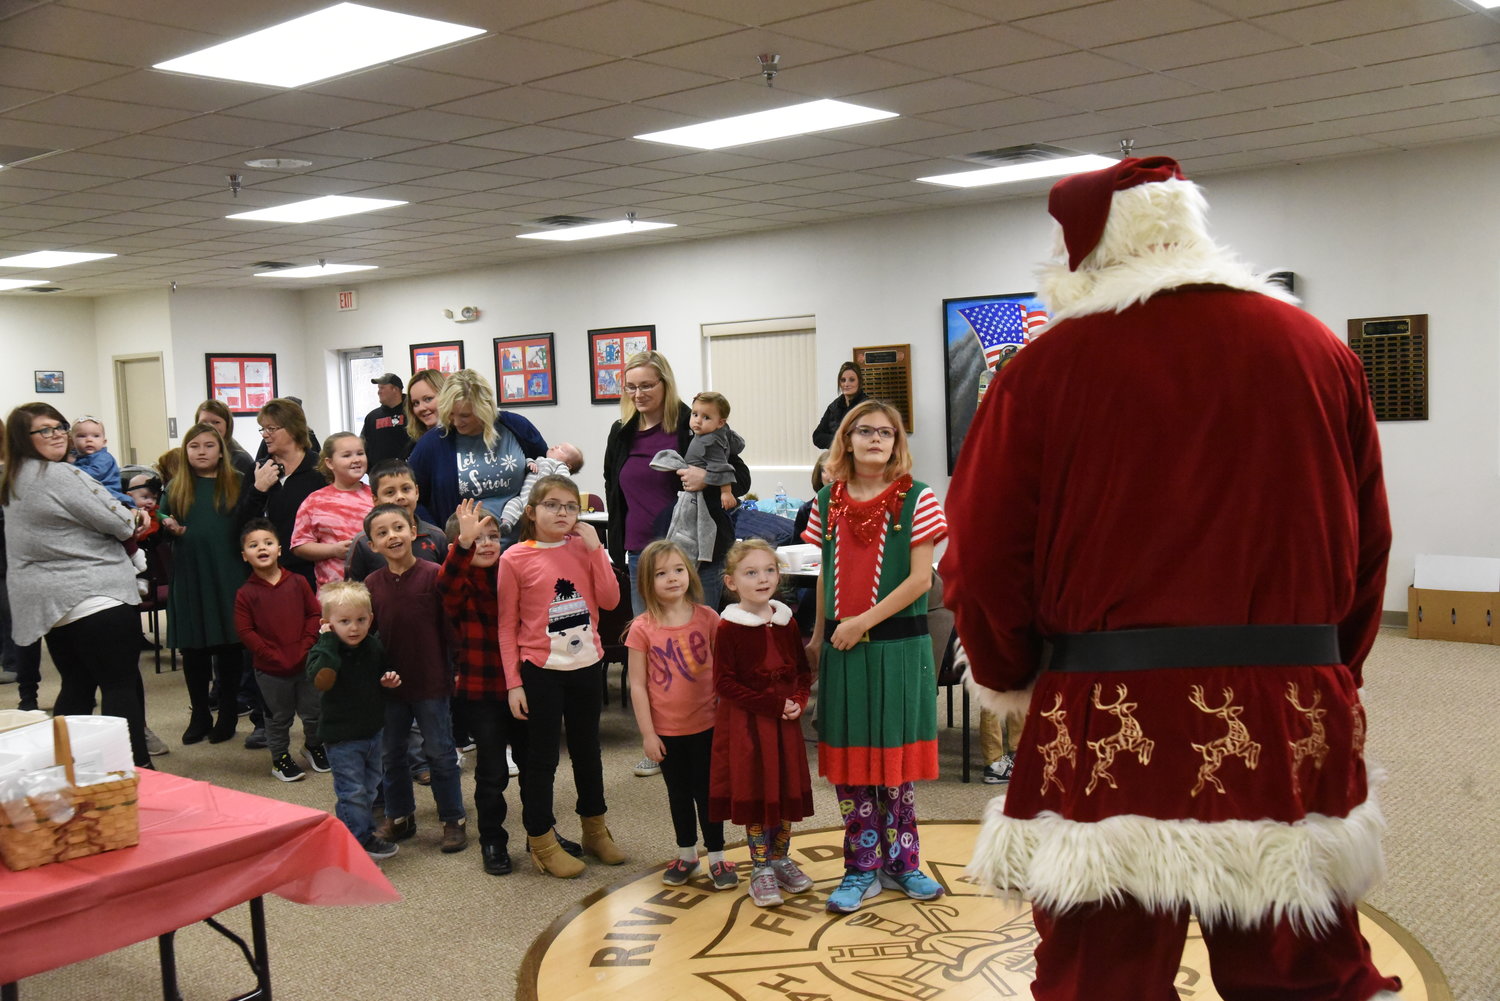 Children lined up to see Santa at the Riverside fire station on Dec. 14.